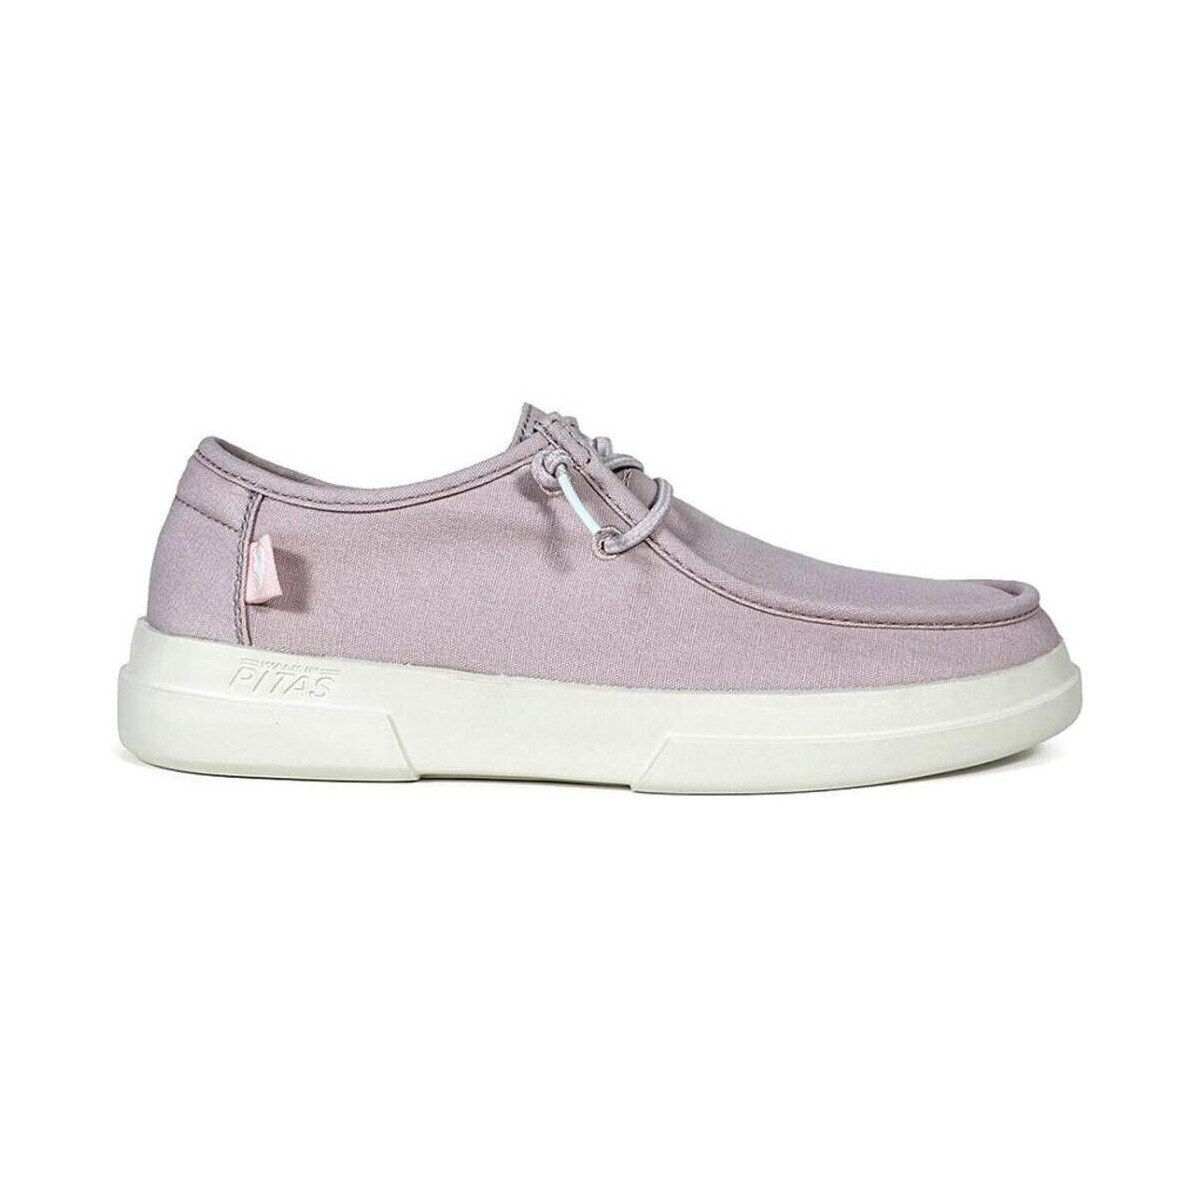 Chaussures Baskets basses Walk In Pitas  Violet